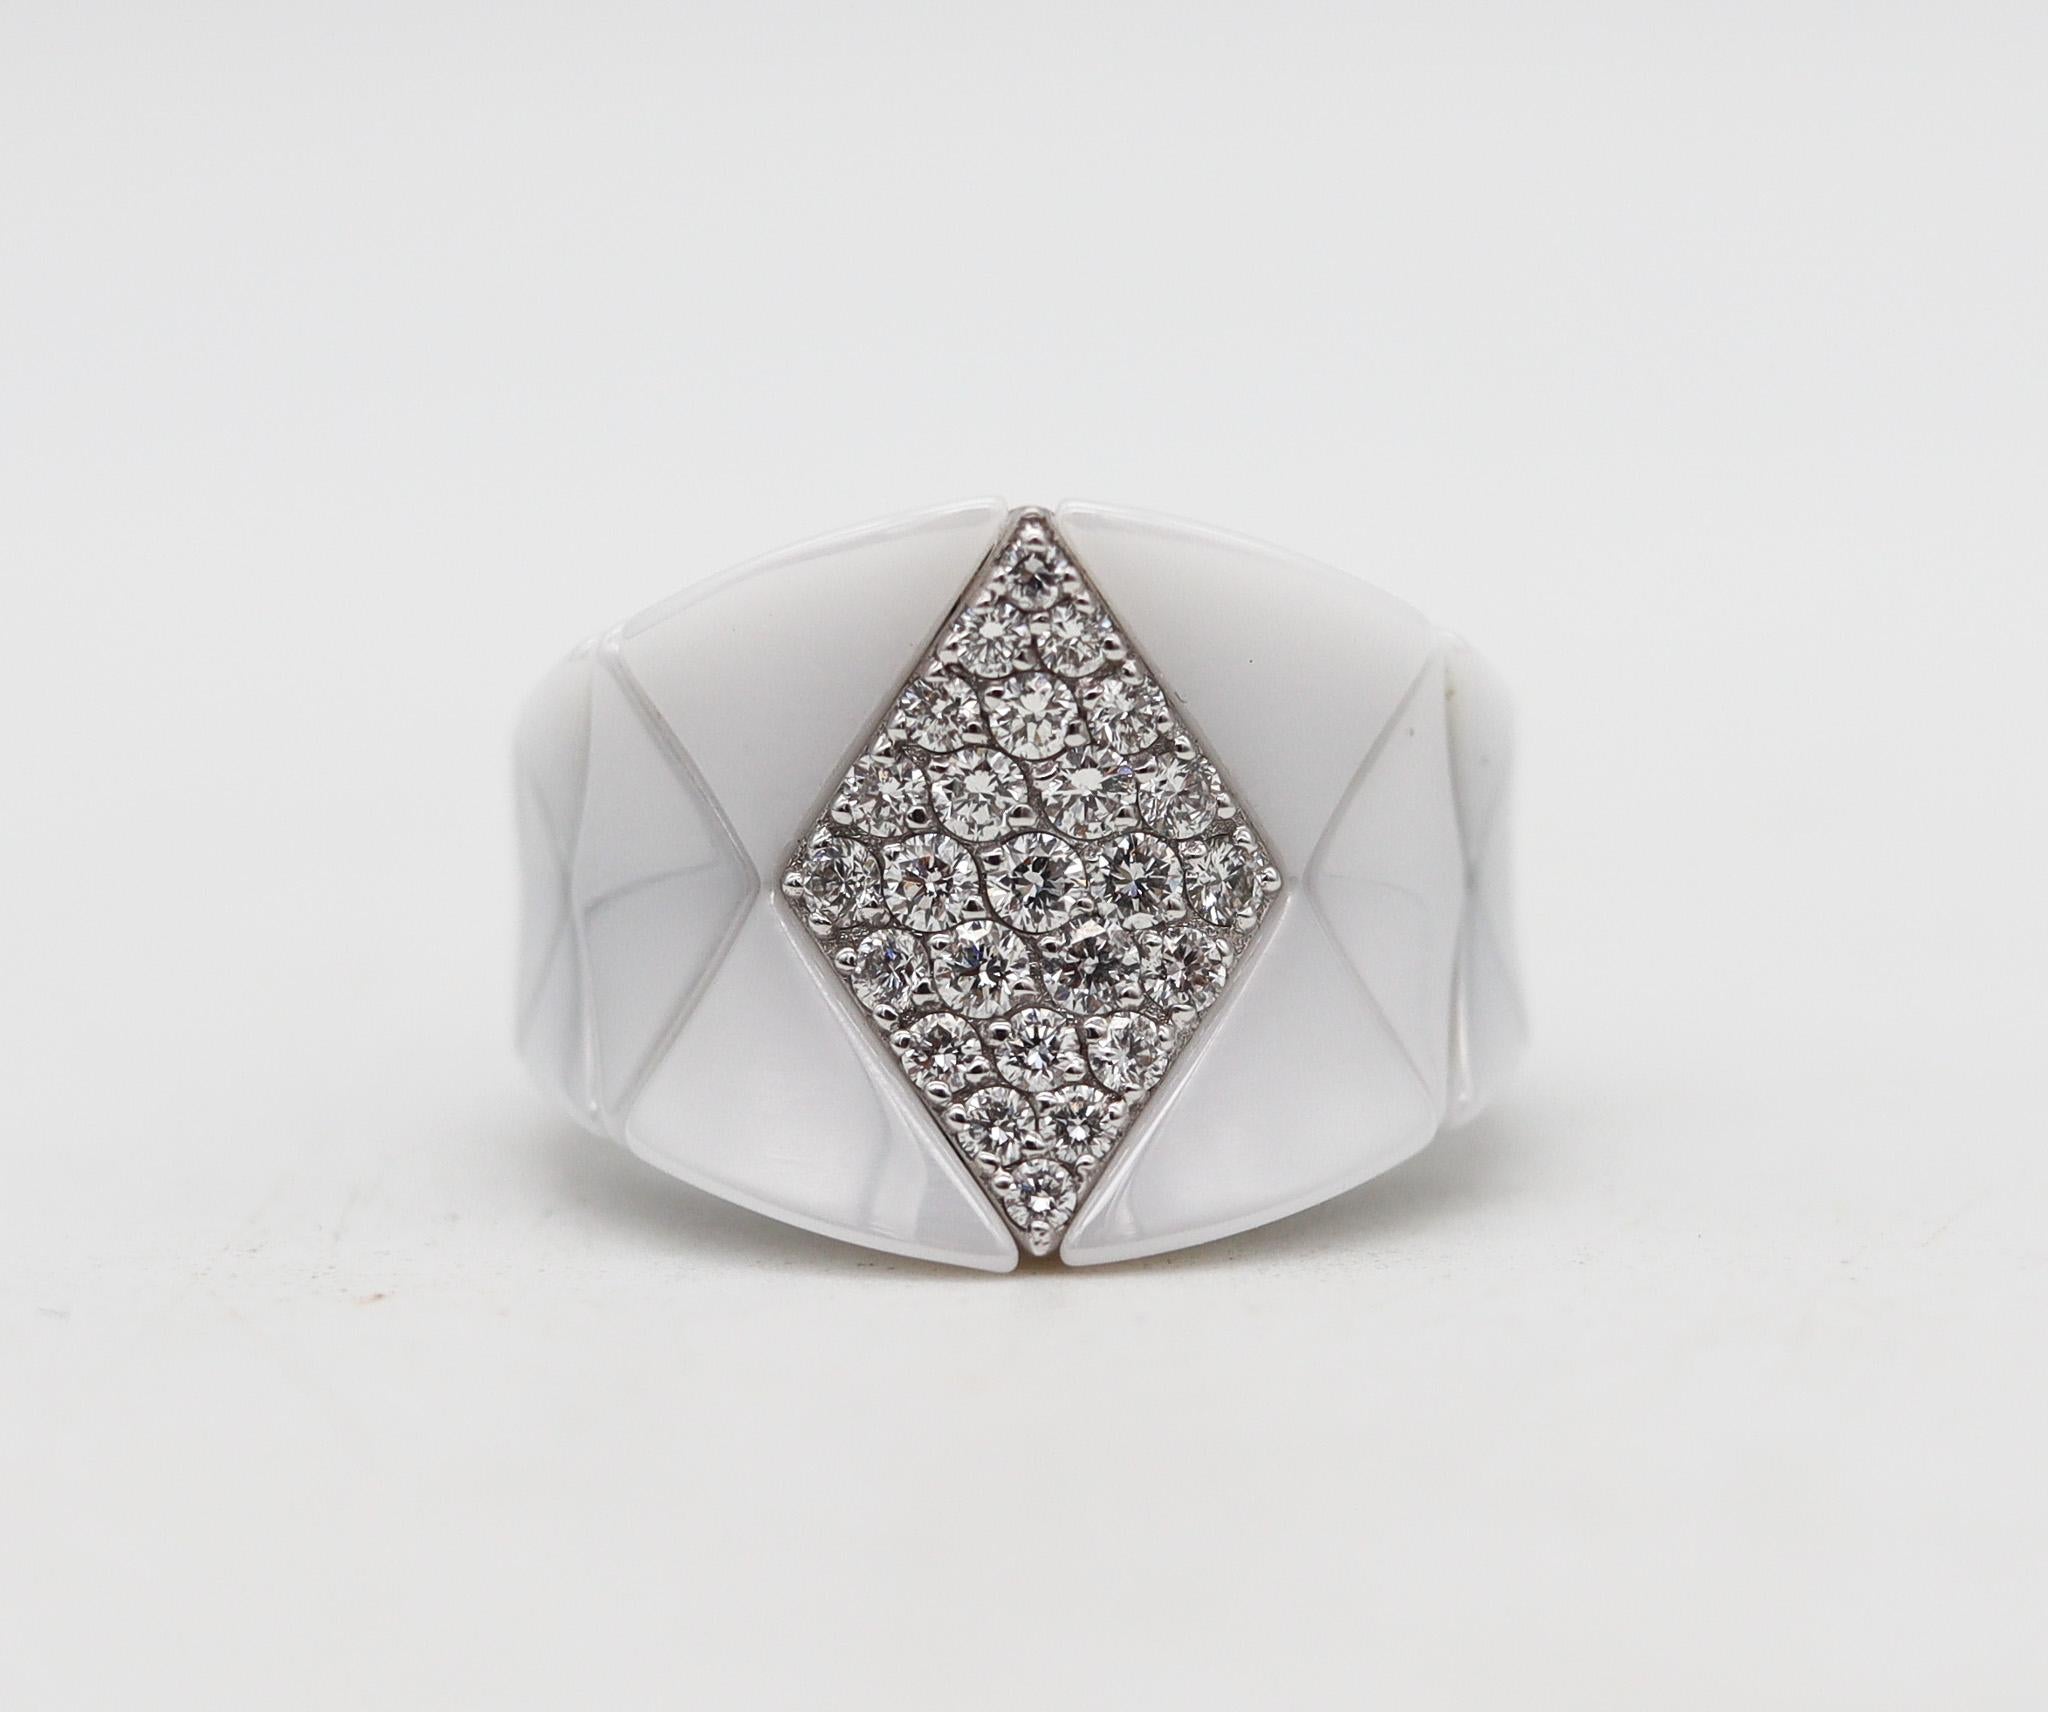 Ceramic cocktail ring designed by Roberto Demeglio.

Beautiful ultra modernist ring, created in Turin Italy by the artist jeweler Roberto Demeglio. This cocktail ring has been crafted in white crystalline ceramic with attachments made in solid white